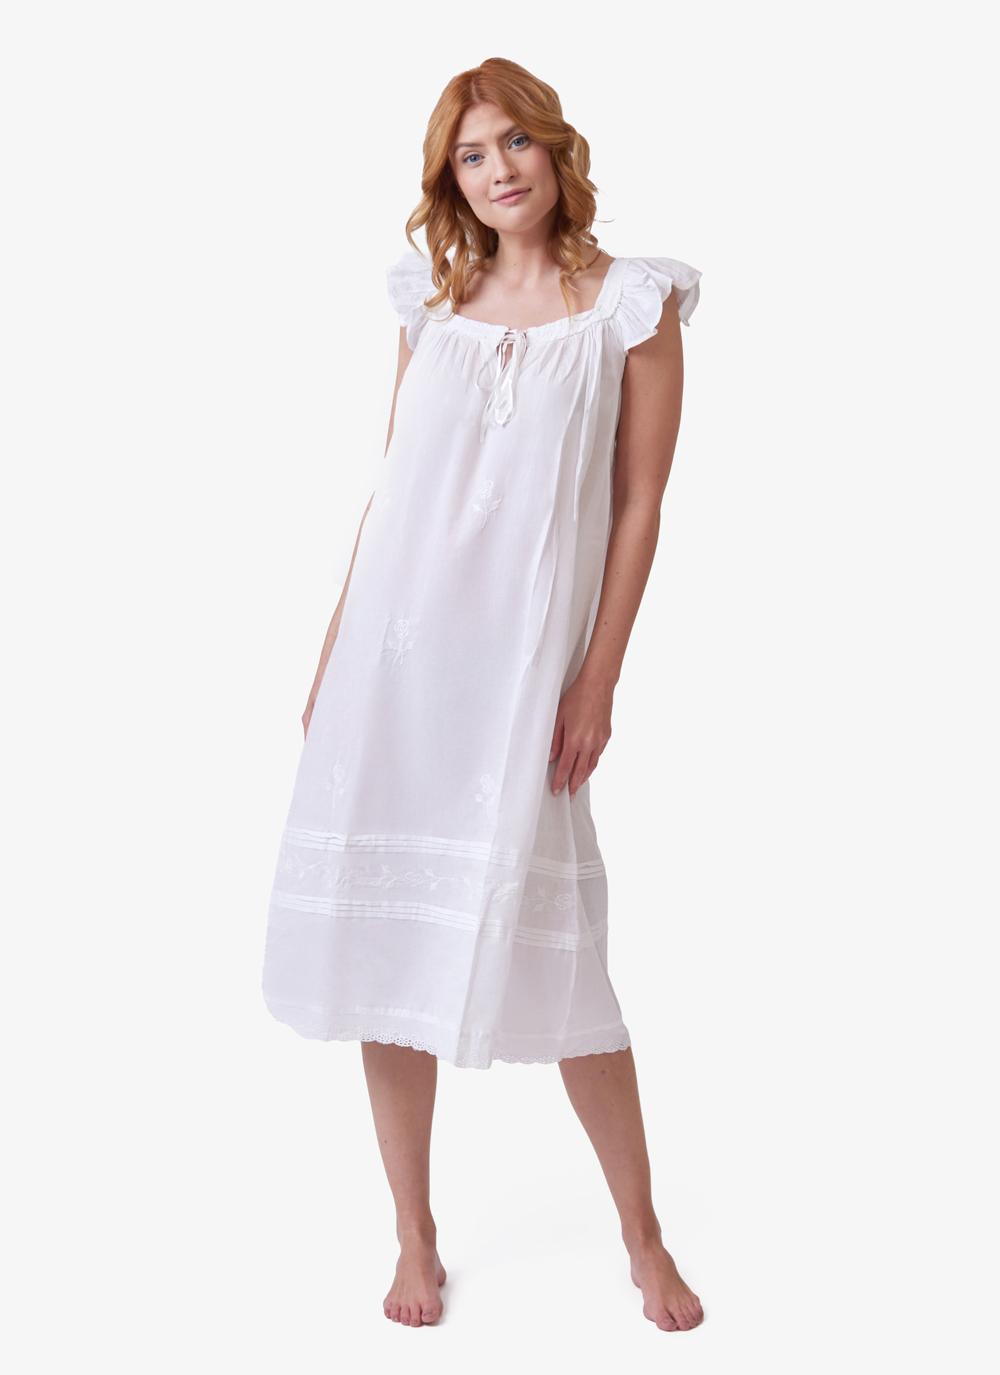 https://www.blarney.com/contentFiles/productImages/Large/Margo%20Cotton%20Nightgown%20in%20White%20(3).jpg